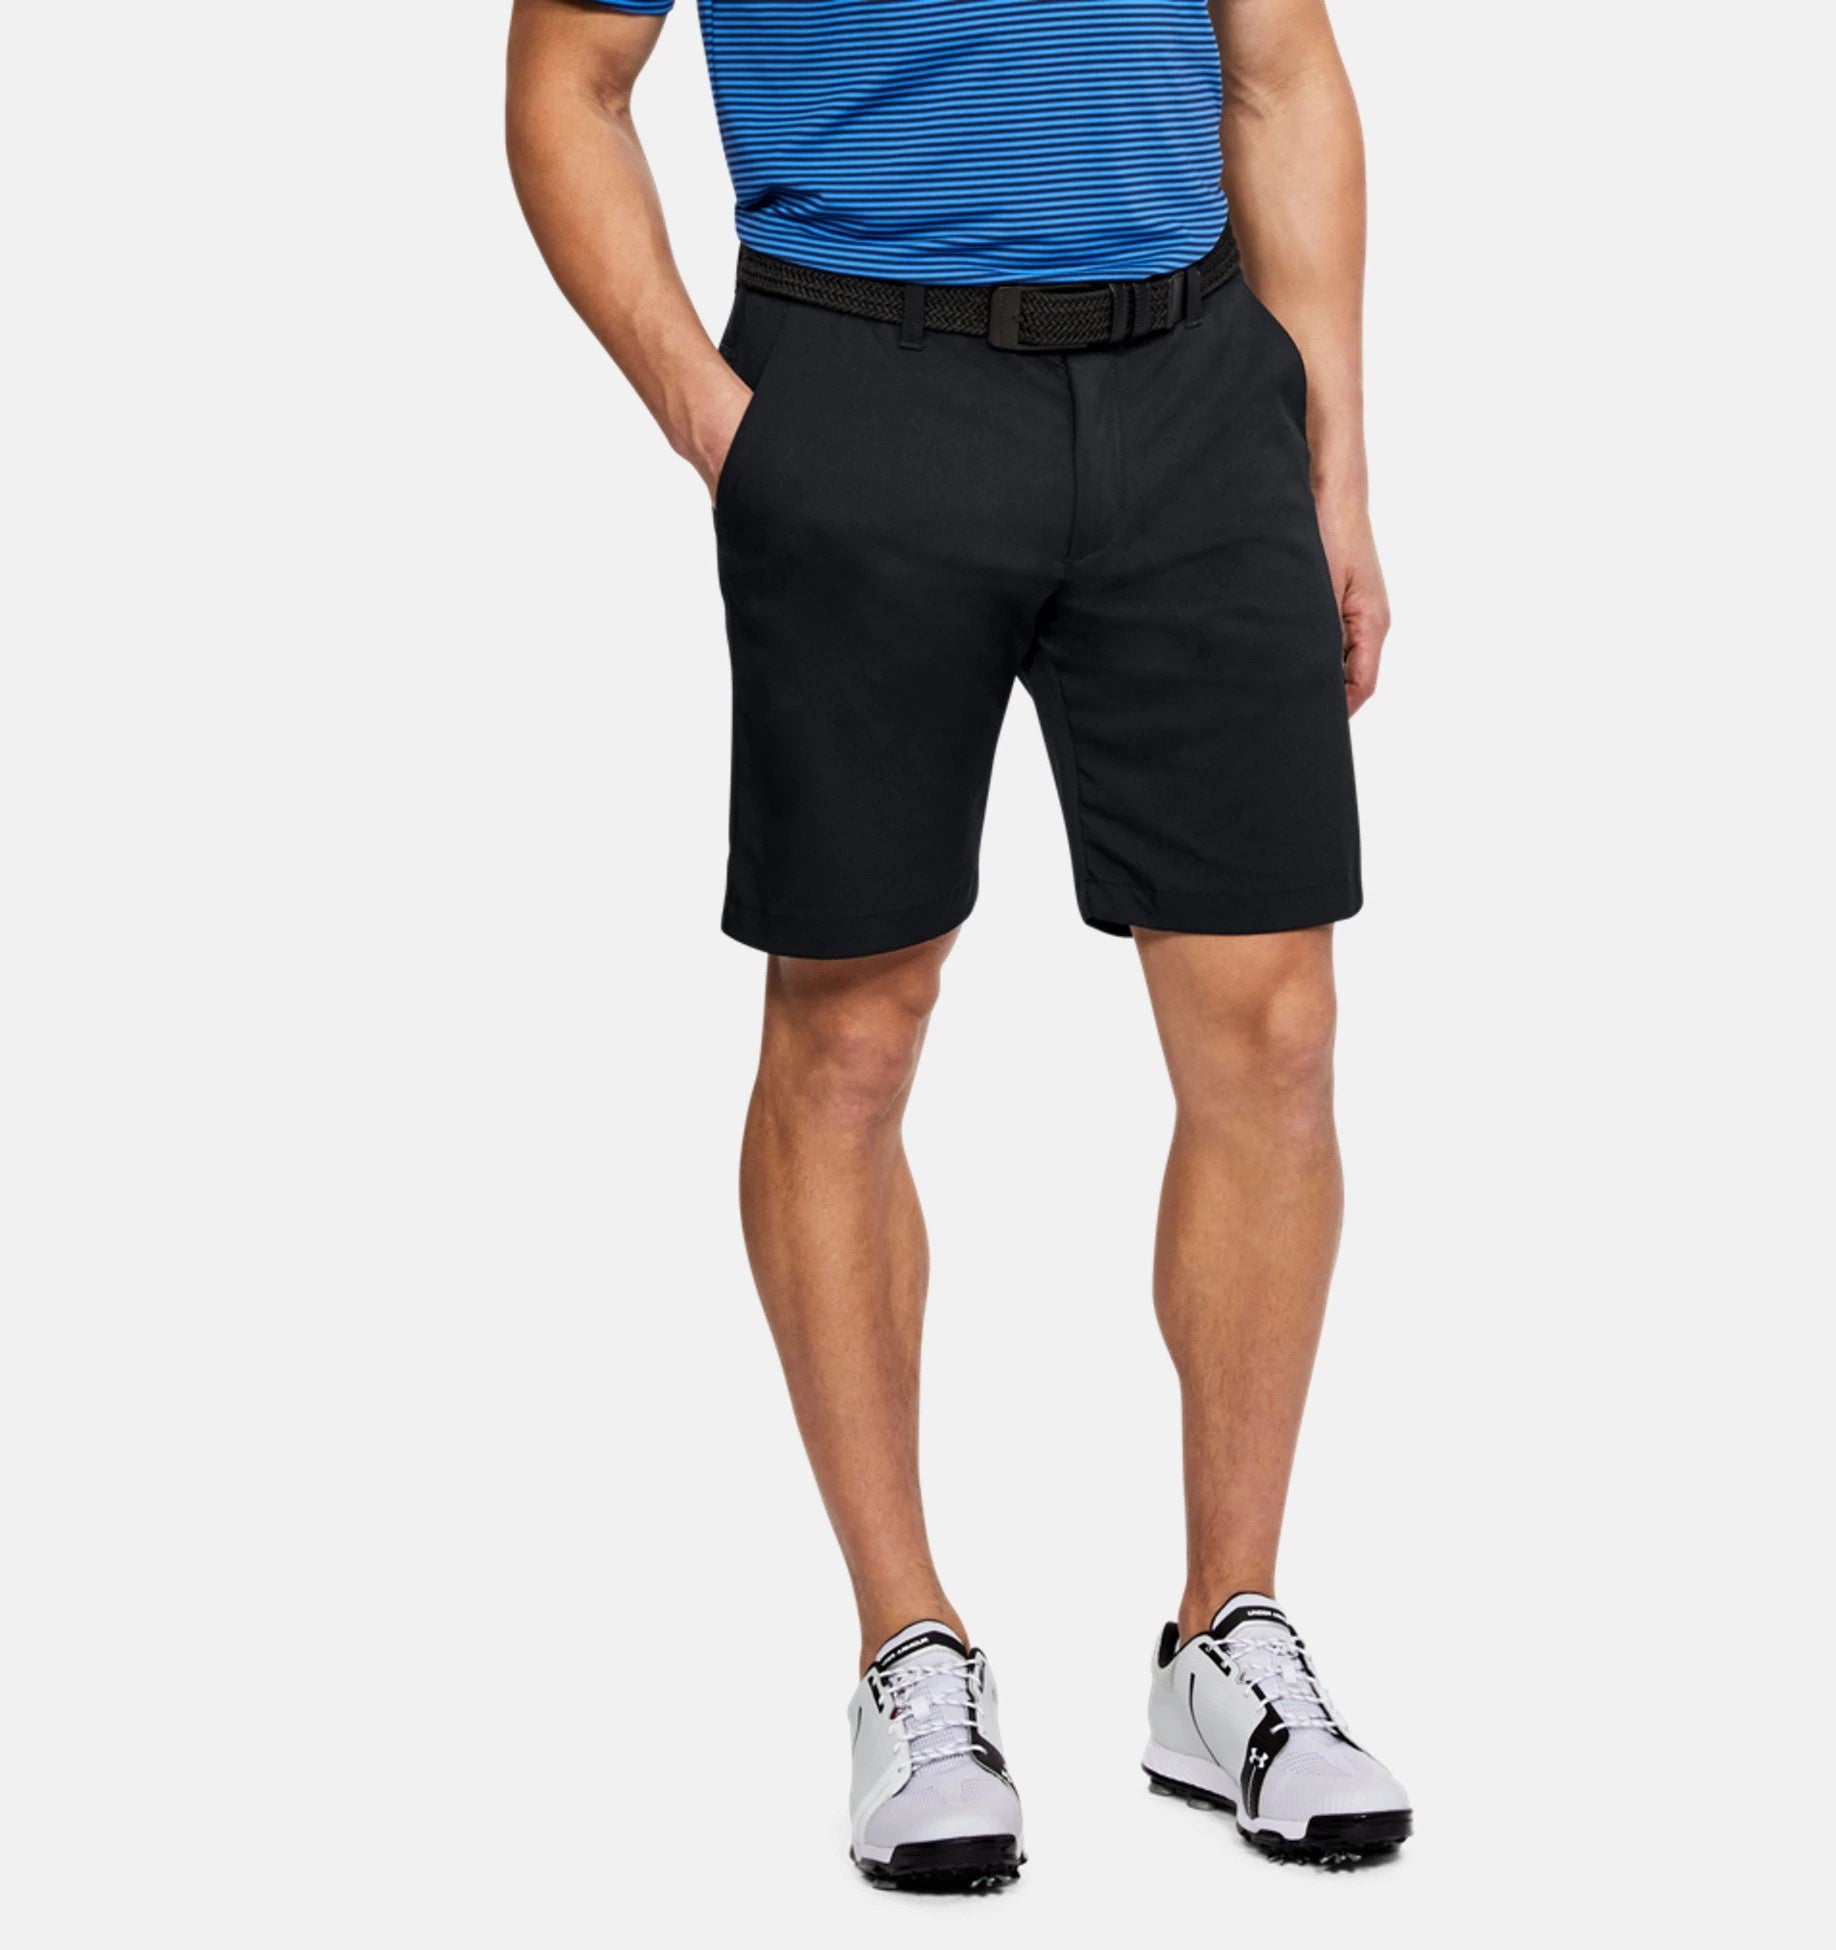 Under Armour Takeover gold shorts are stylish and have elastane for stretch comfort